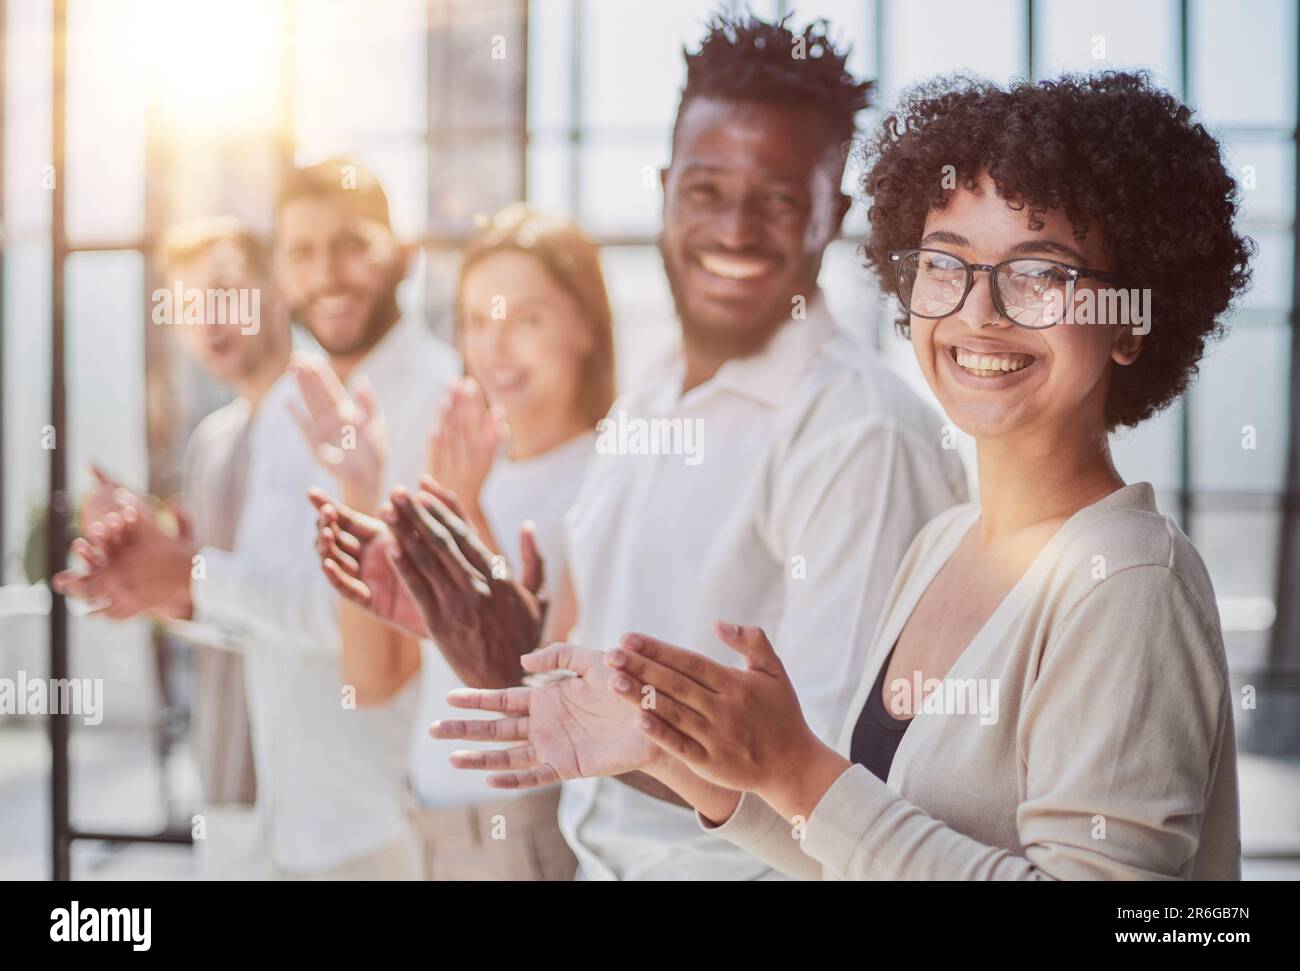 Professional Business Teamwork . People Business Congratulation, Management Corporate Company Stock Photo